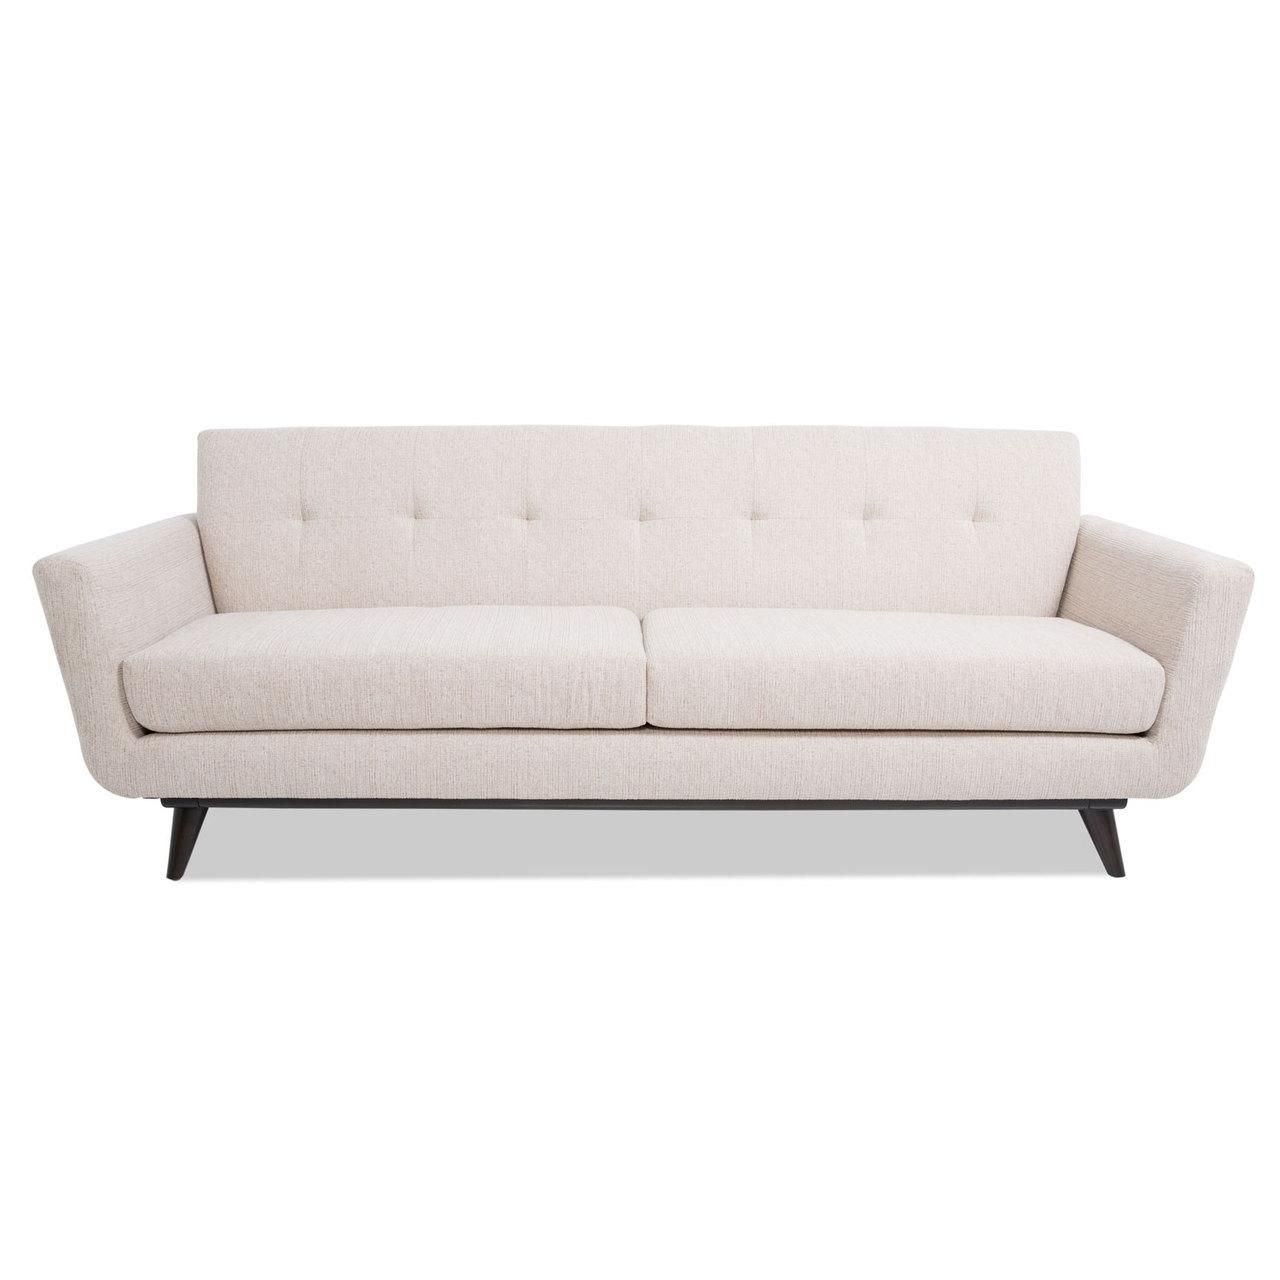 ▻ Sofa : 23 Leather Sleeper Sectional Sofa Bed Lovely Images Throughout Fancy Sofas (View 17 of 20)